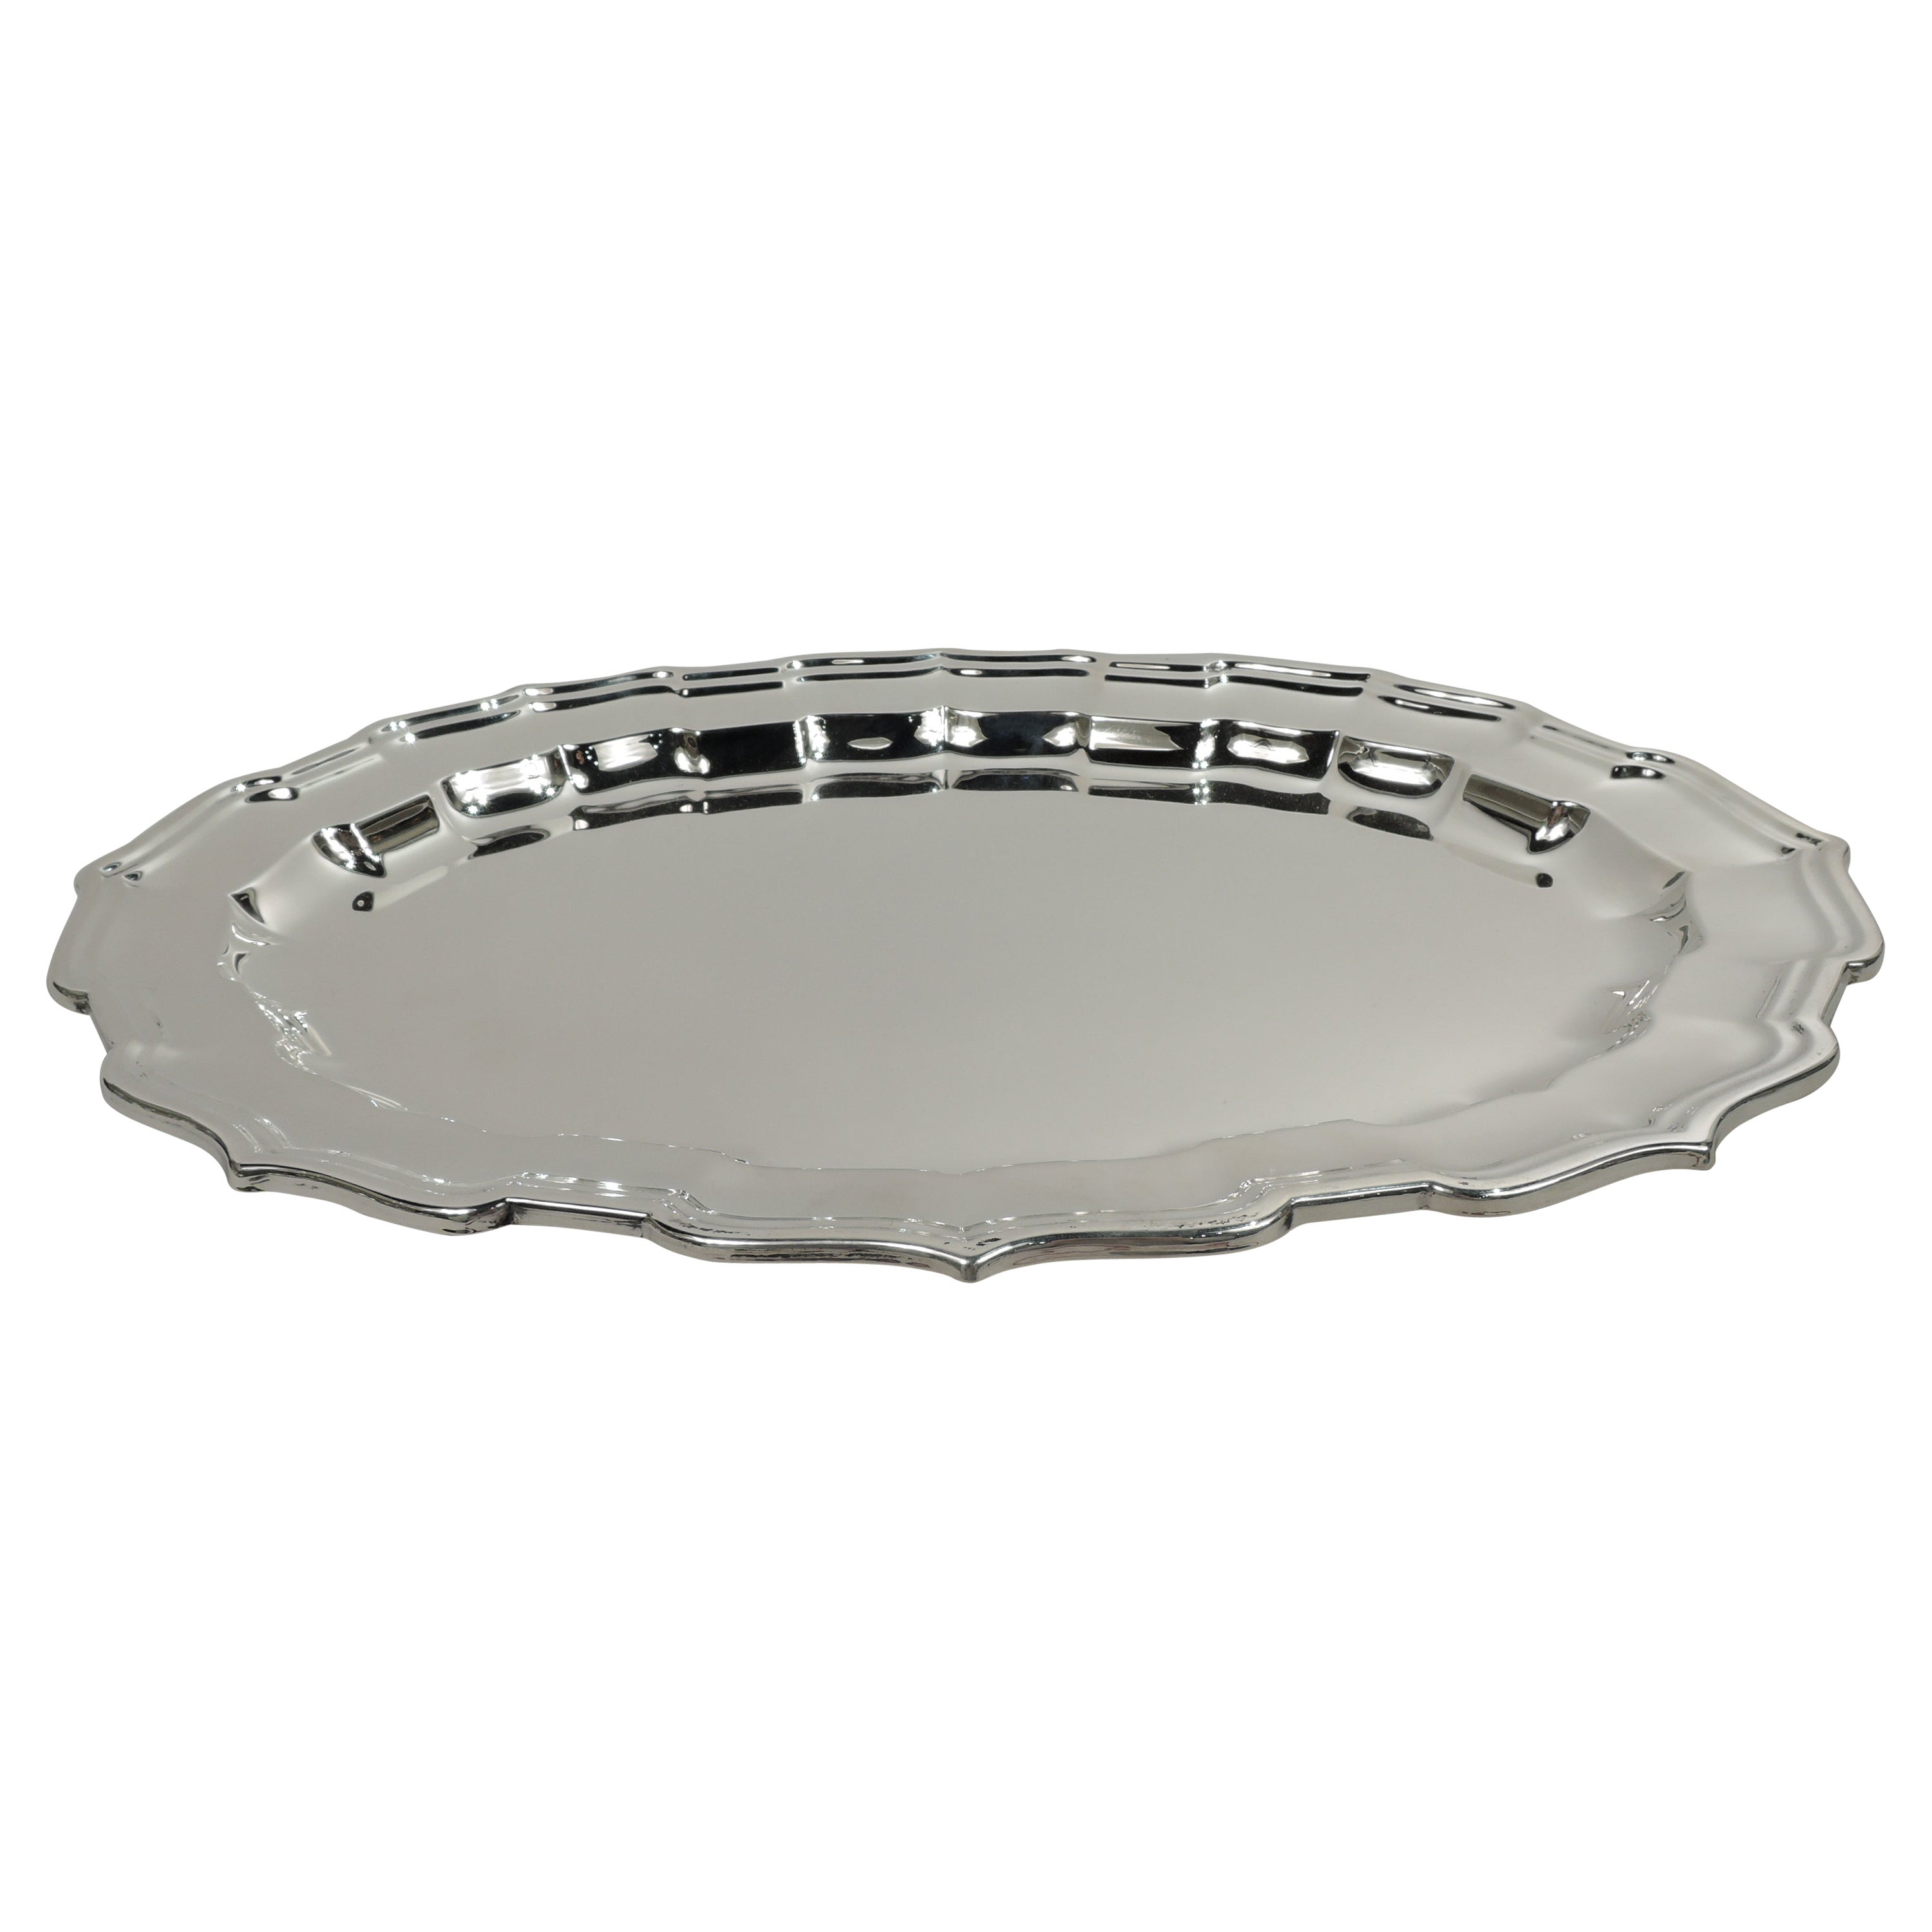 Cartier Sterling Silver Serving Georgian-Style Chippendale Tray